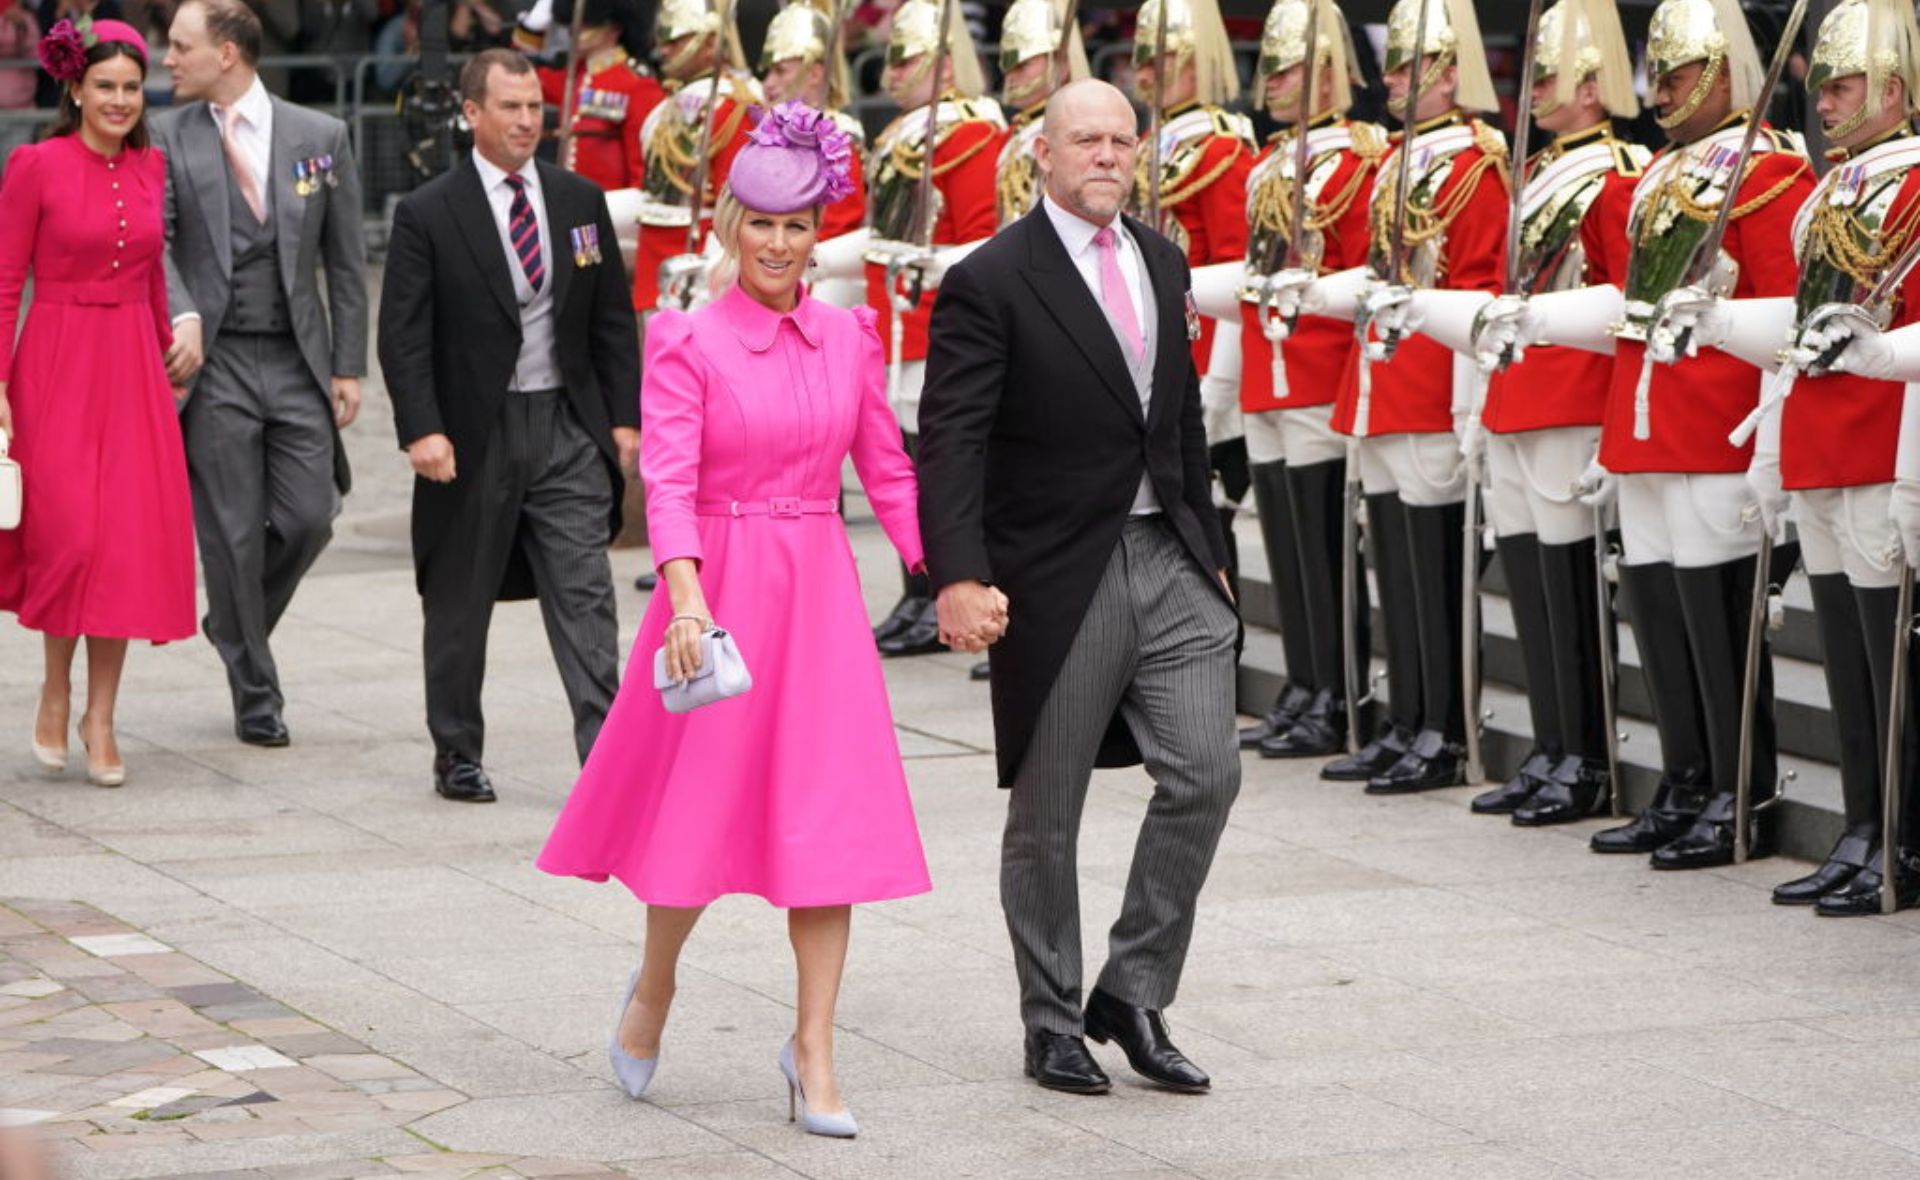 Mike Tindall opens up about ”life inside” Buckingham Palace